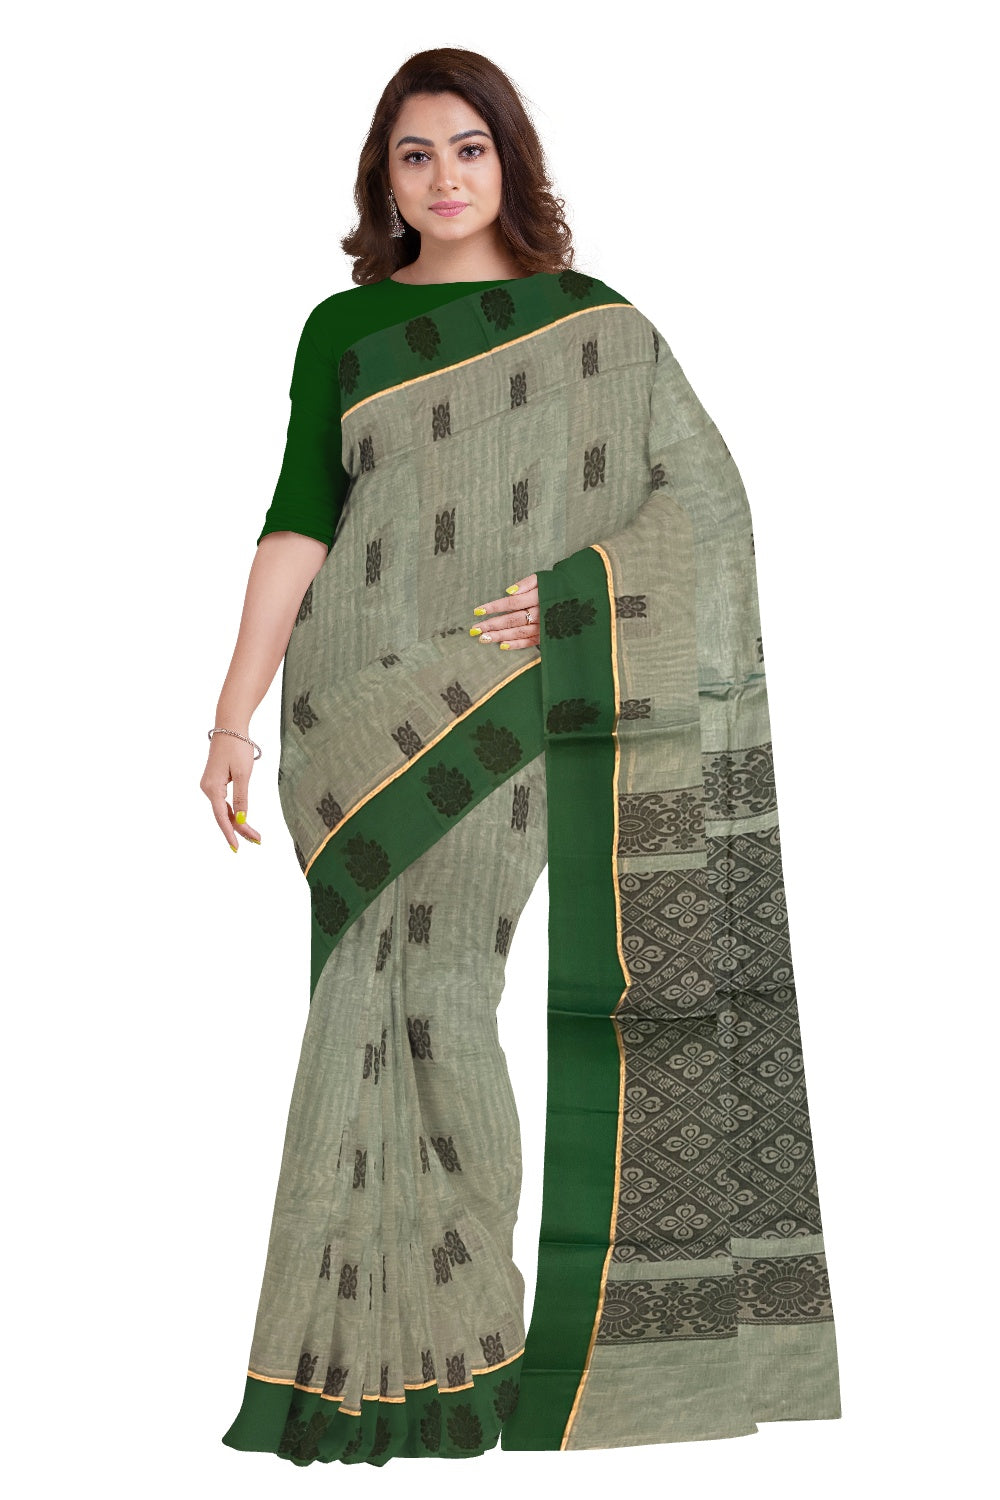 Southloom Cotton Green Saree with Woven Butta Works on Body